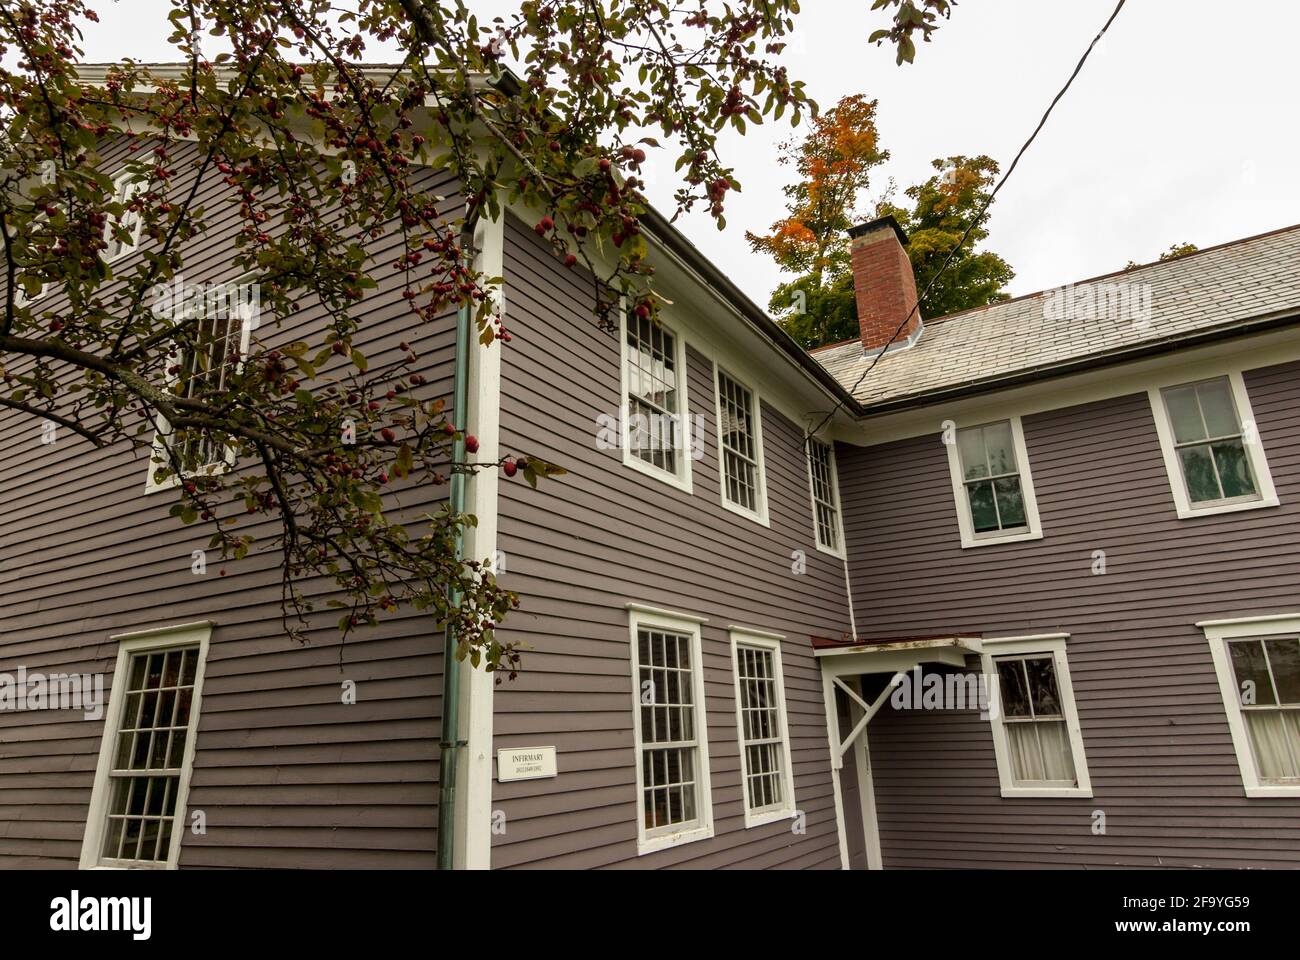 A purple / grey clapperboard house in the Canterbury Shaker Village, New Hampshire, USA. Stock Photo